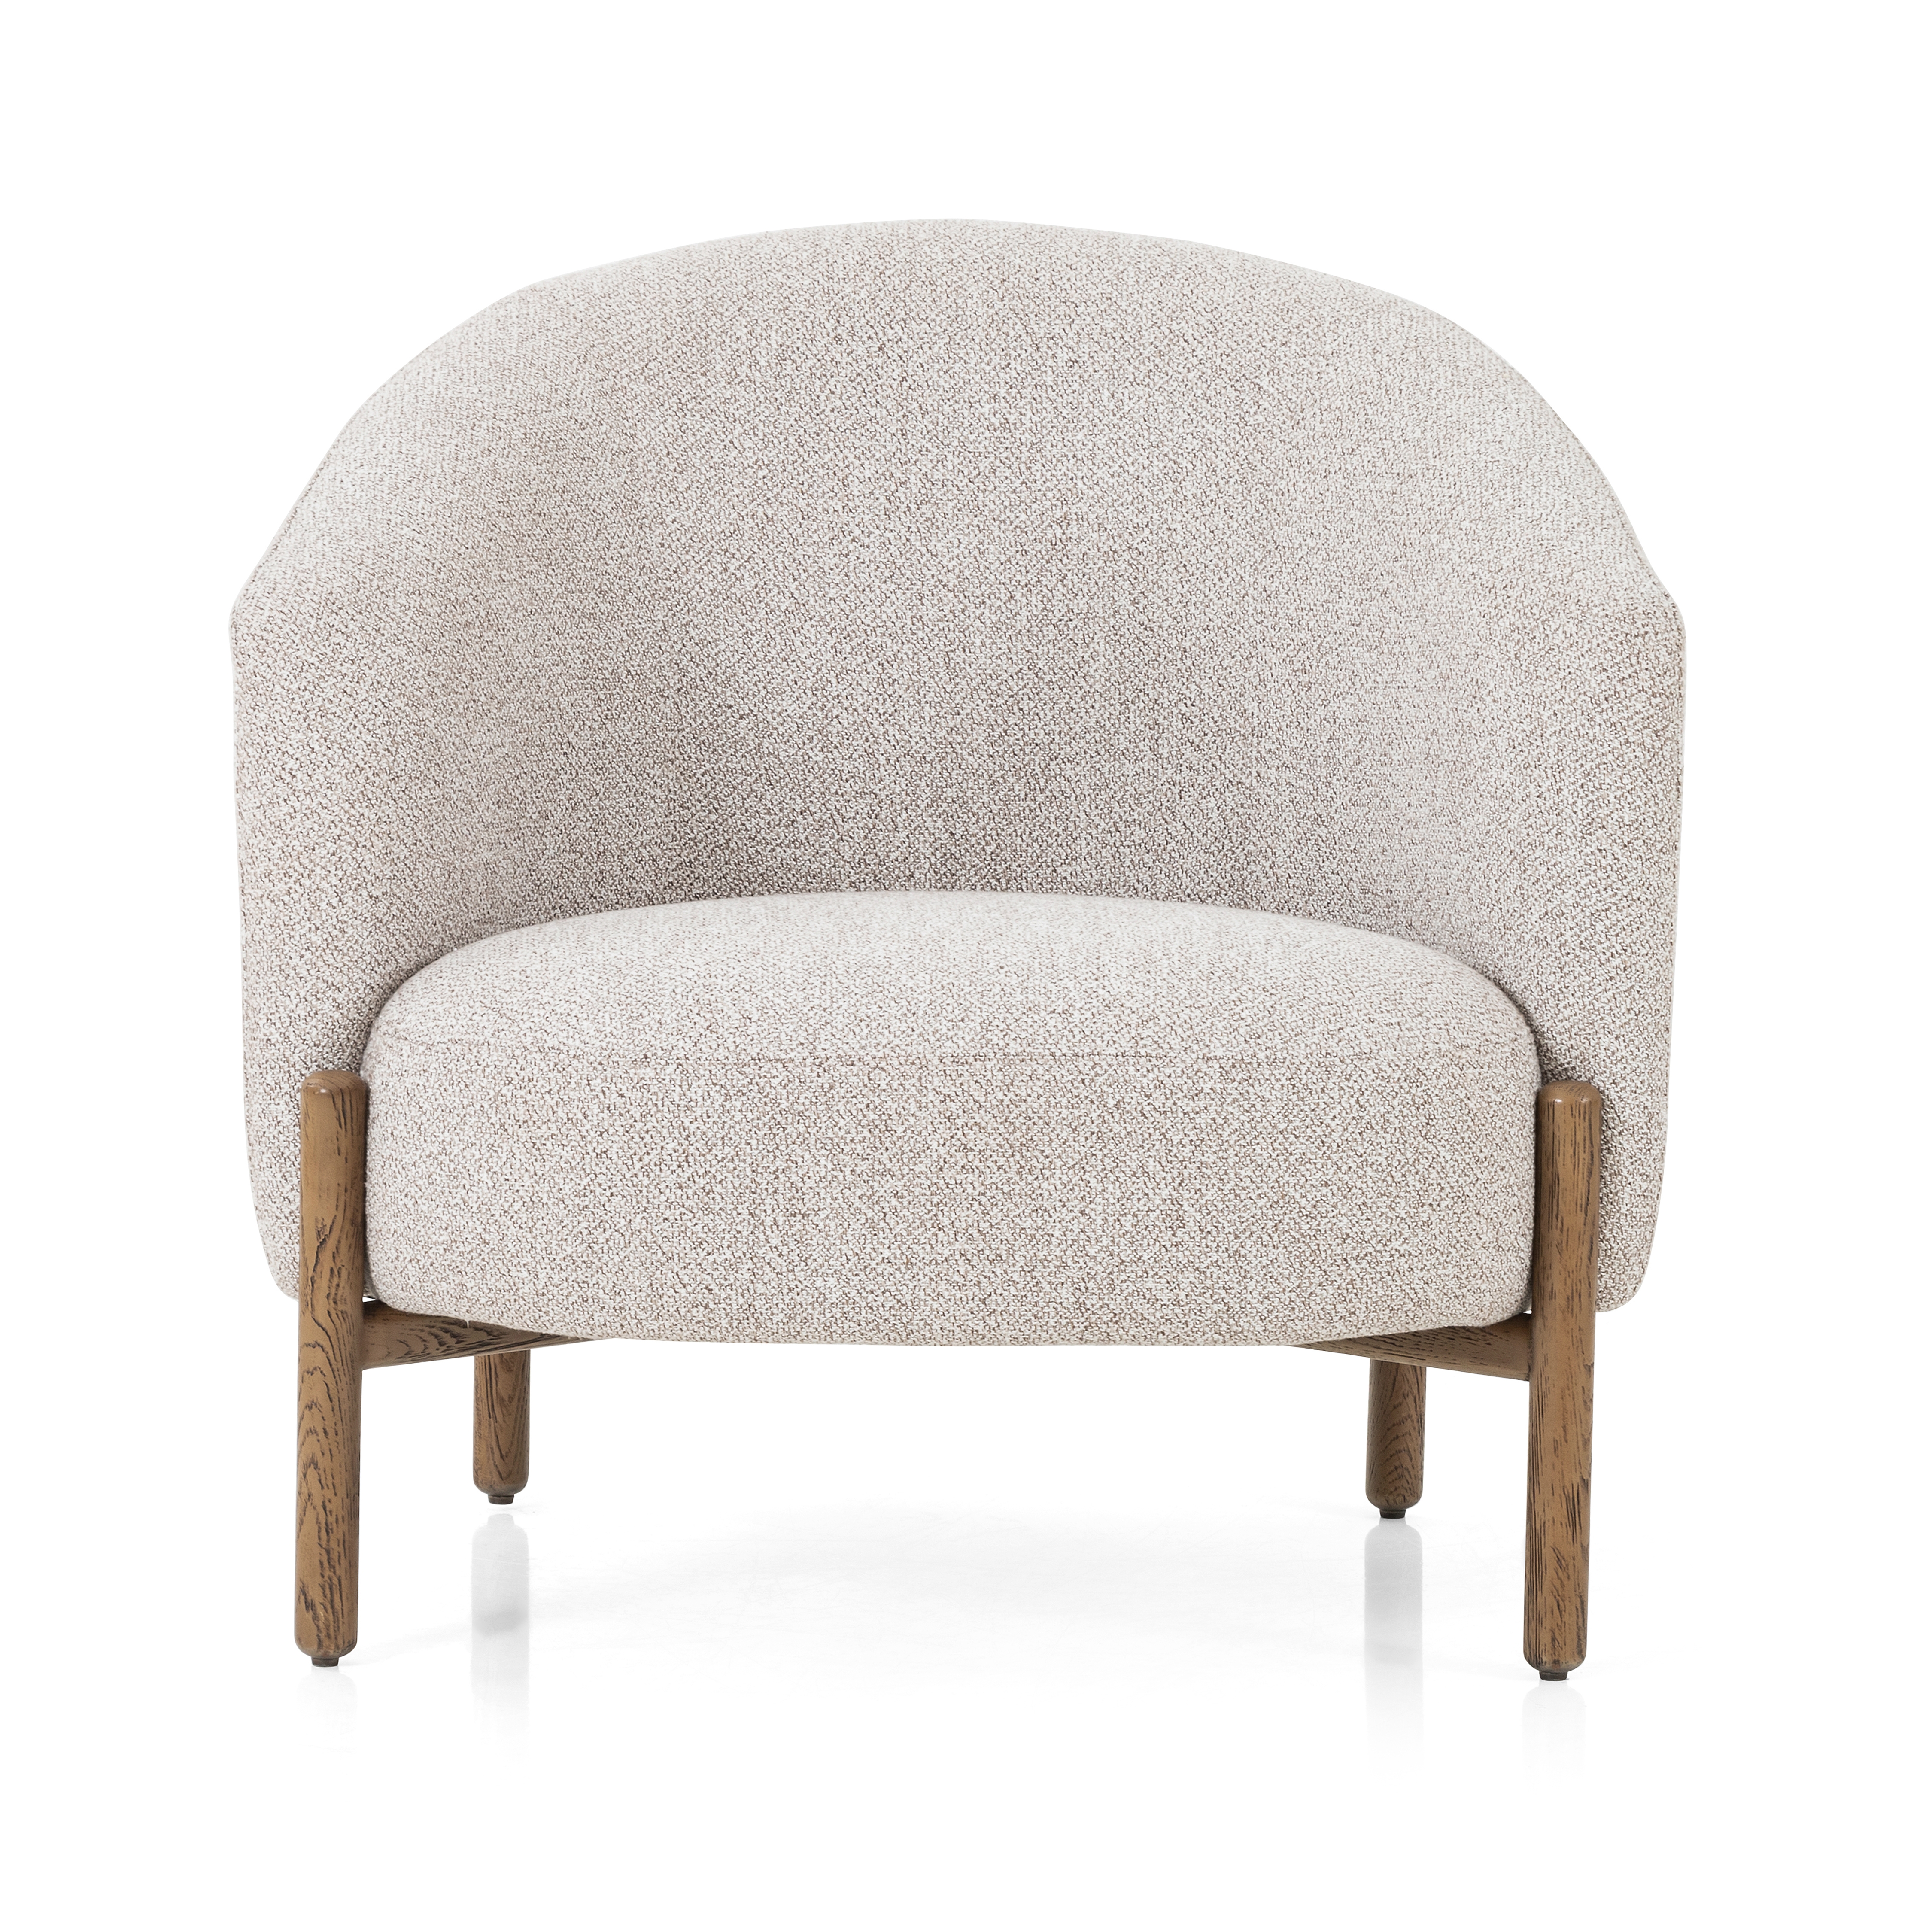 Enfield Chair-Astor Stone - Image 4